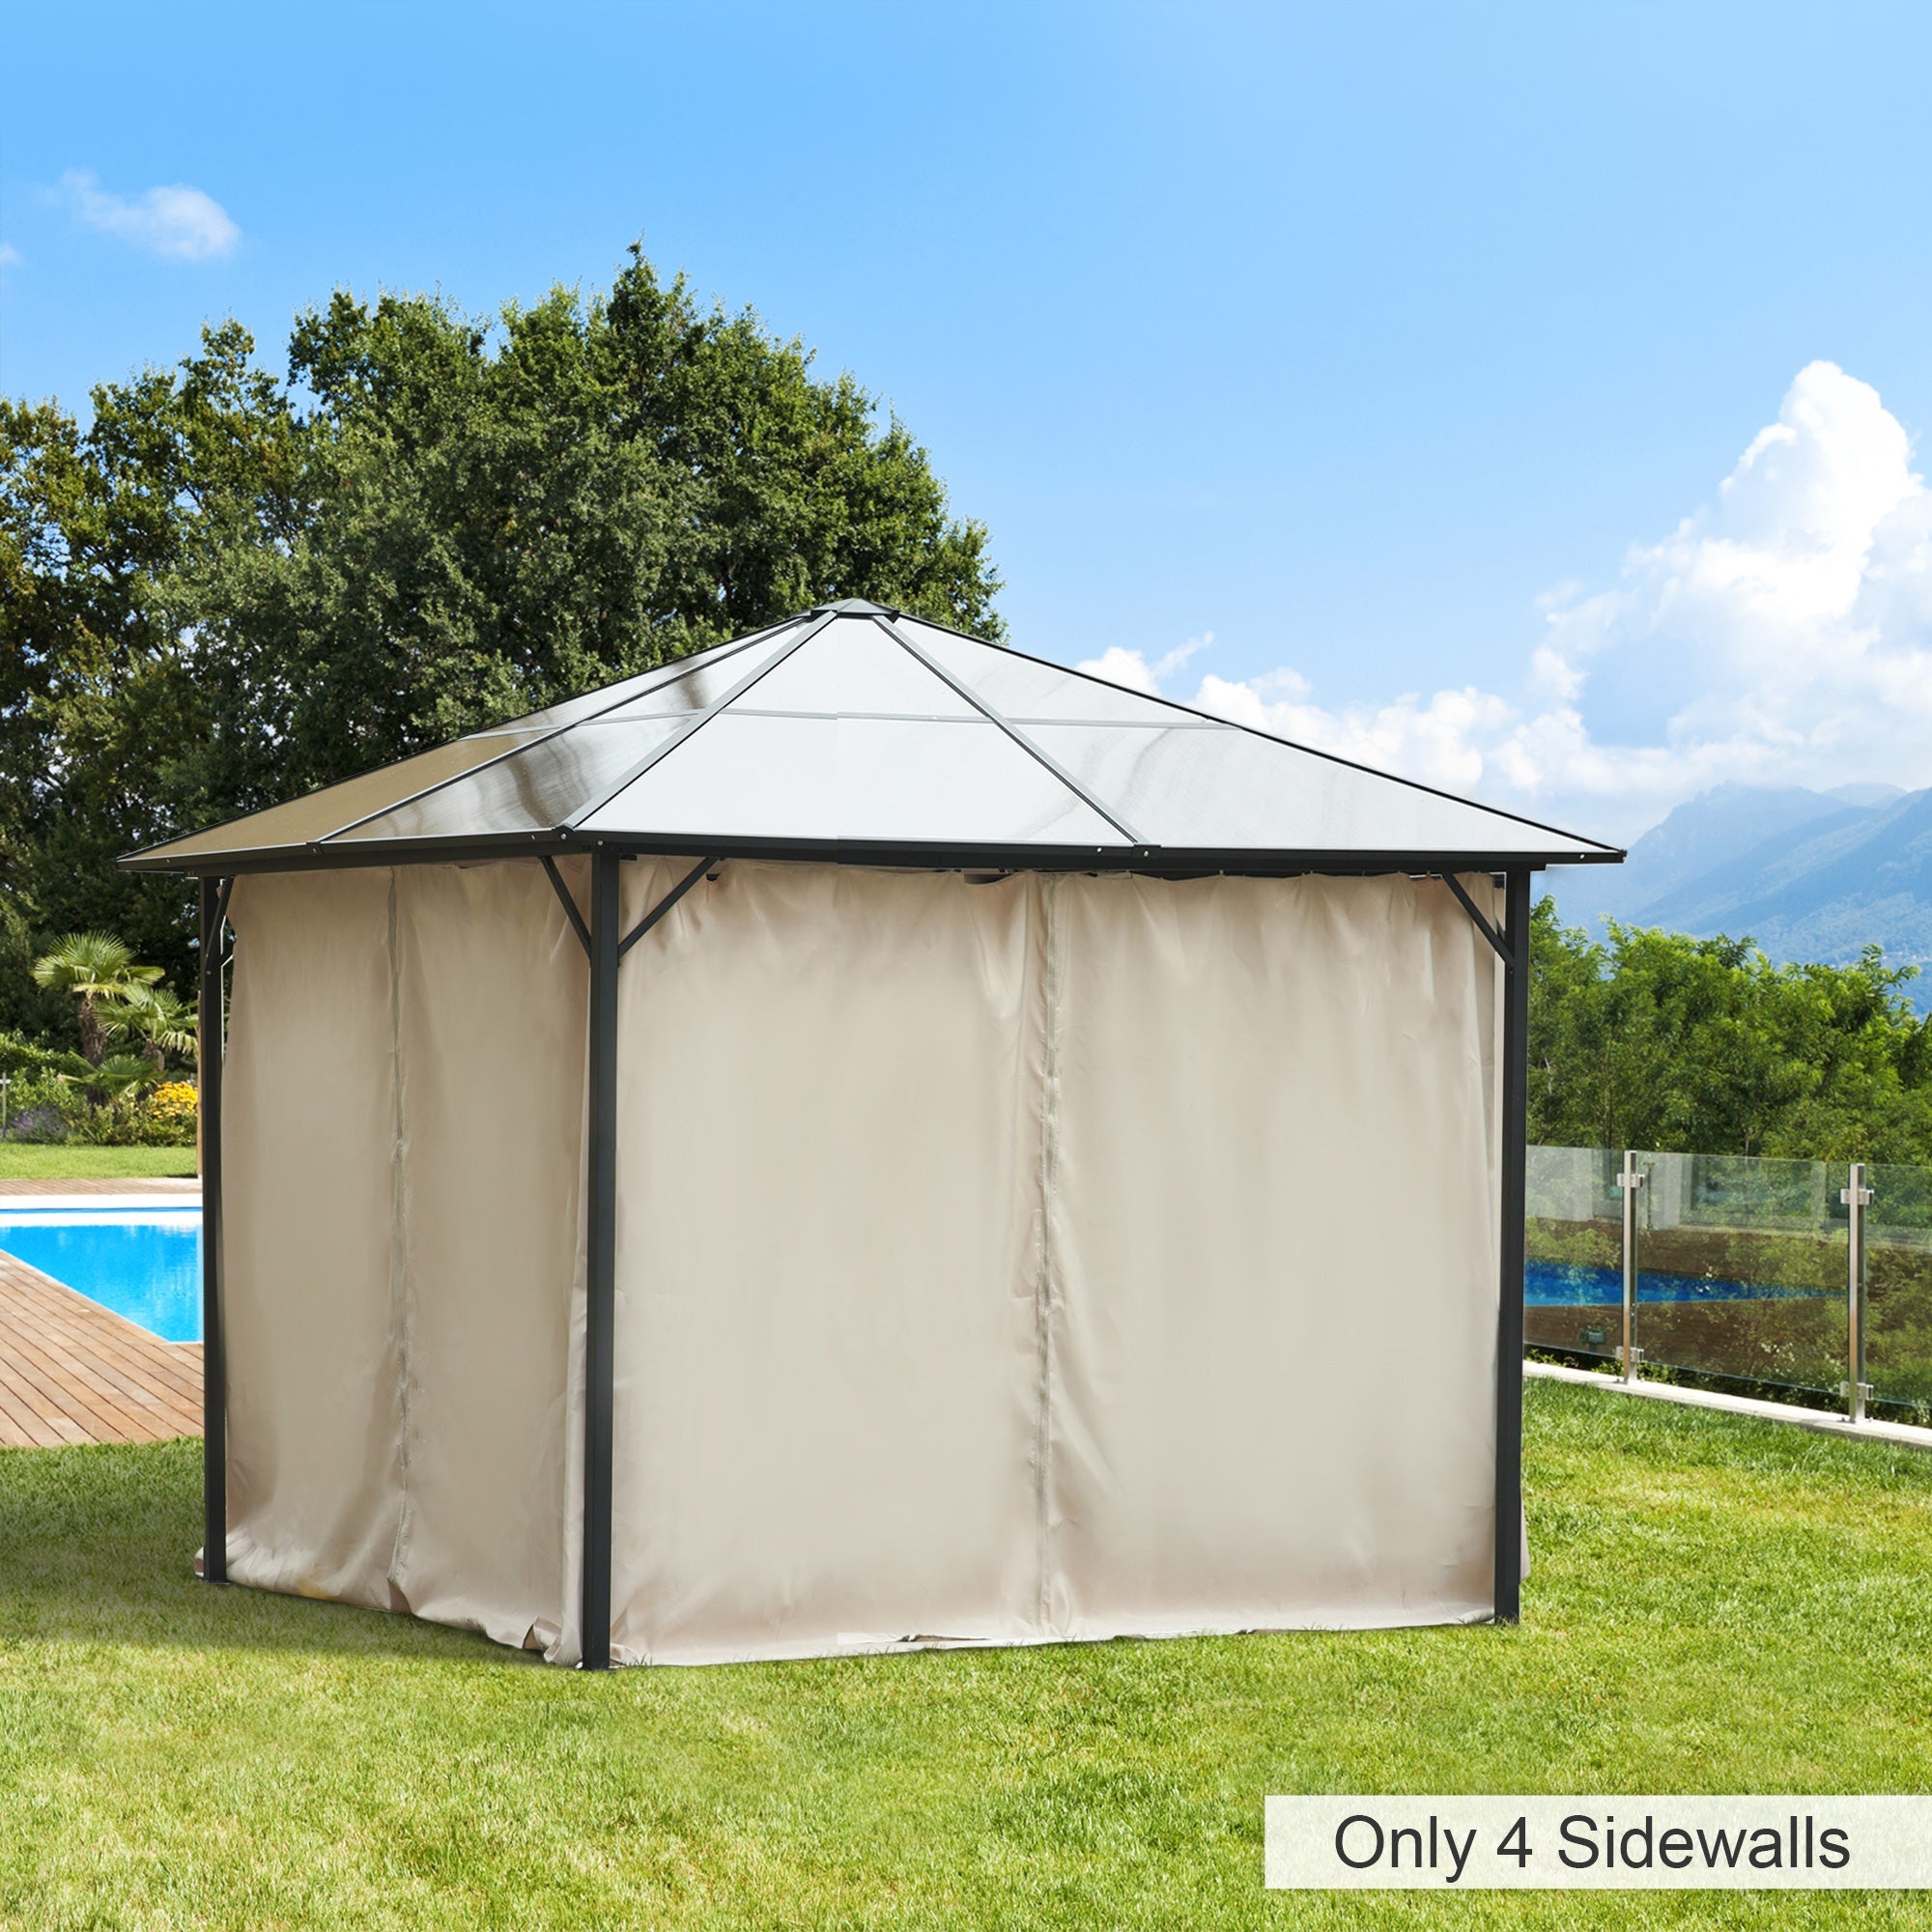 4 Pack Universal Gazebo Replacement Sidewalls Privacy Panel for Most 3 x 3m Gazebo Canopy Pavillion Outdoor Shelter Curtains Beige-1